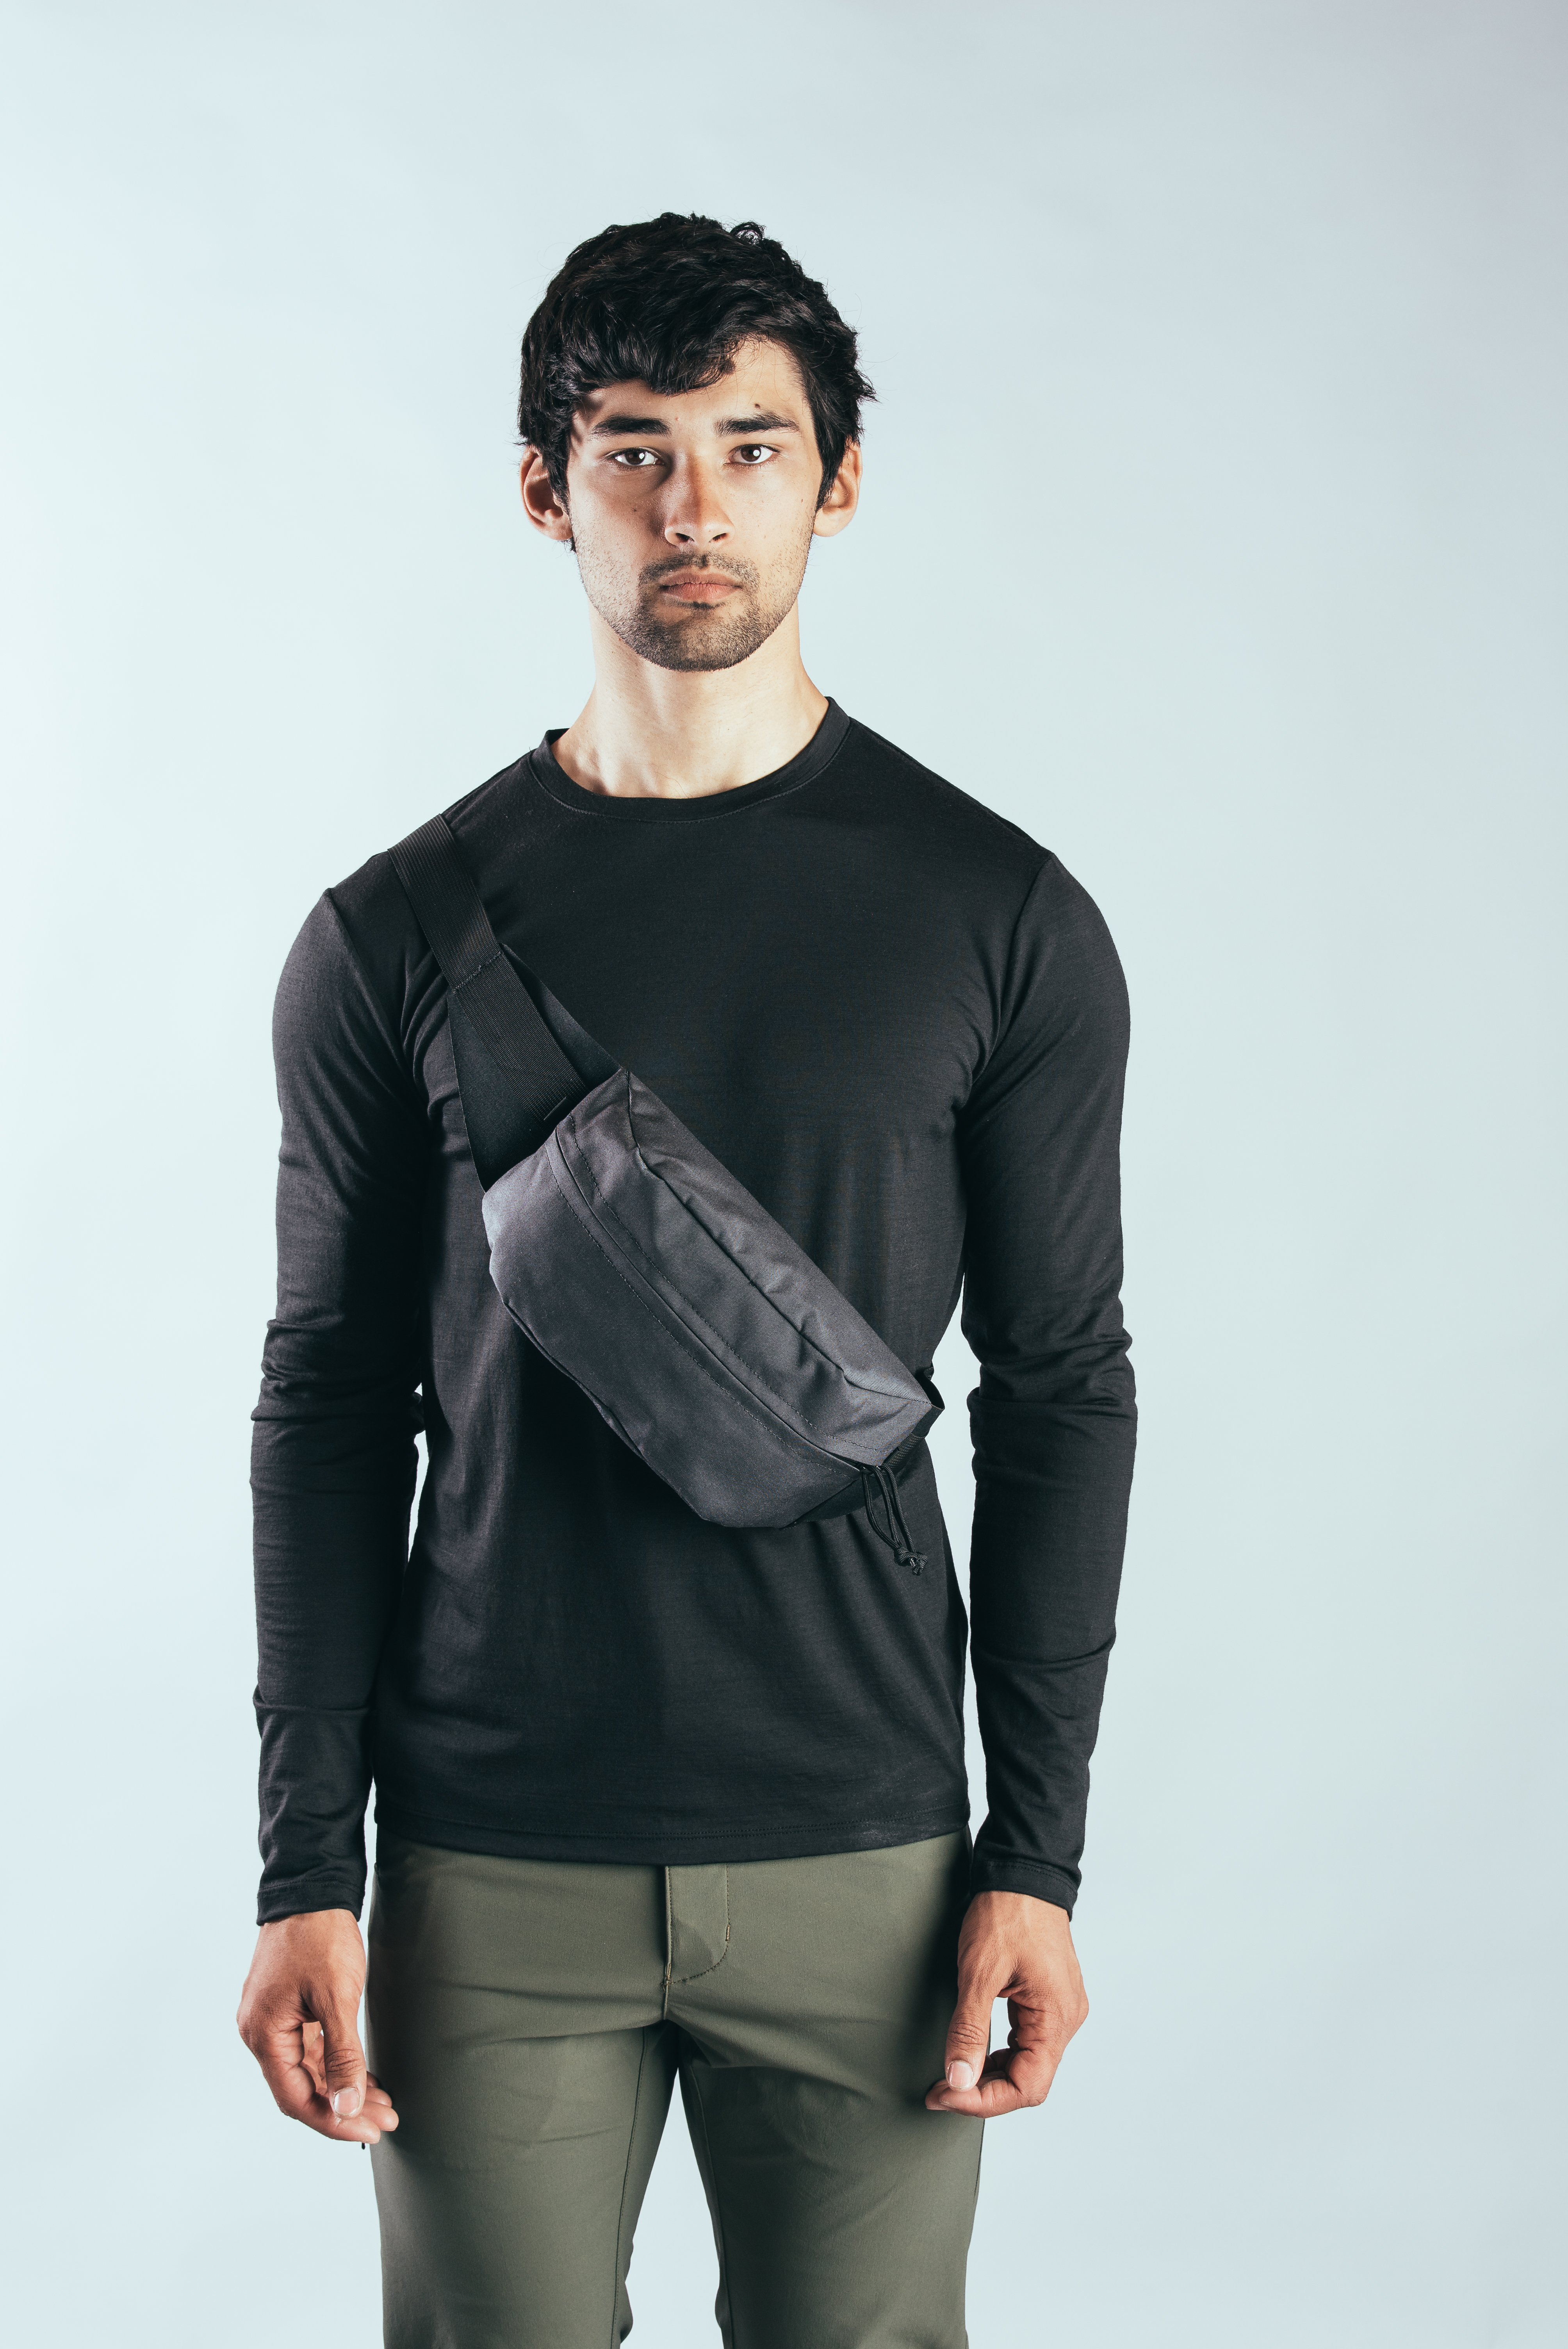 Axis Modular Waist Pack by Mission Workshop